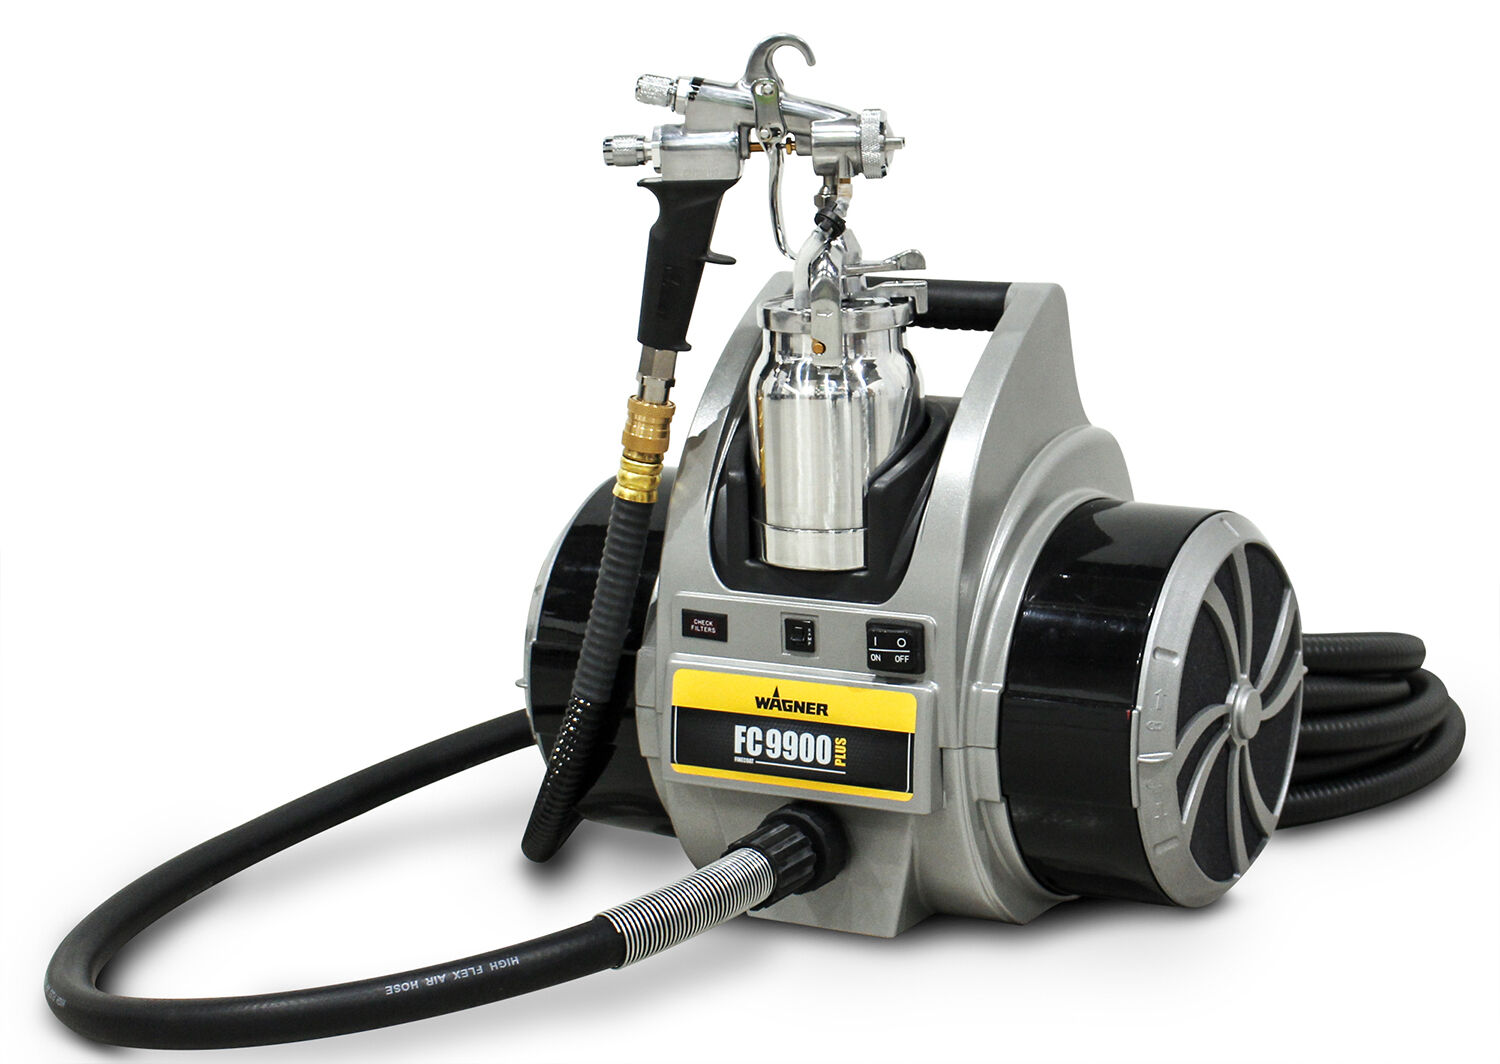 Turbine Paint Sprayers: how they work, advantages and applications | WAGNER